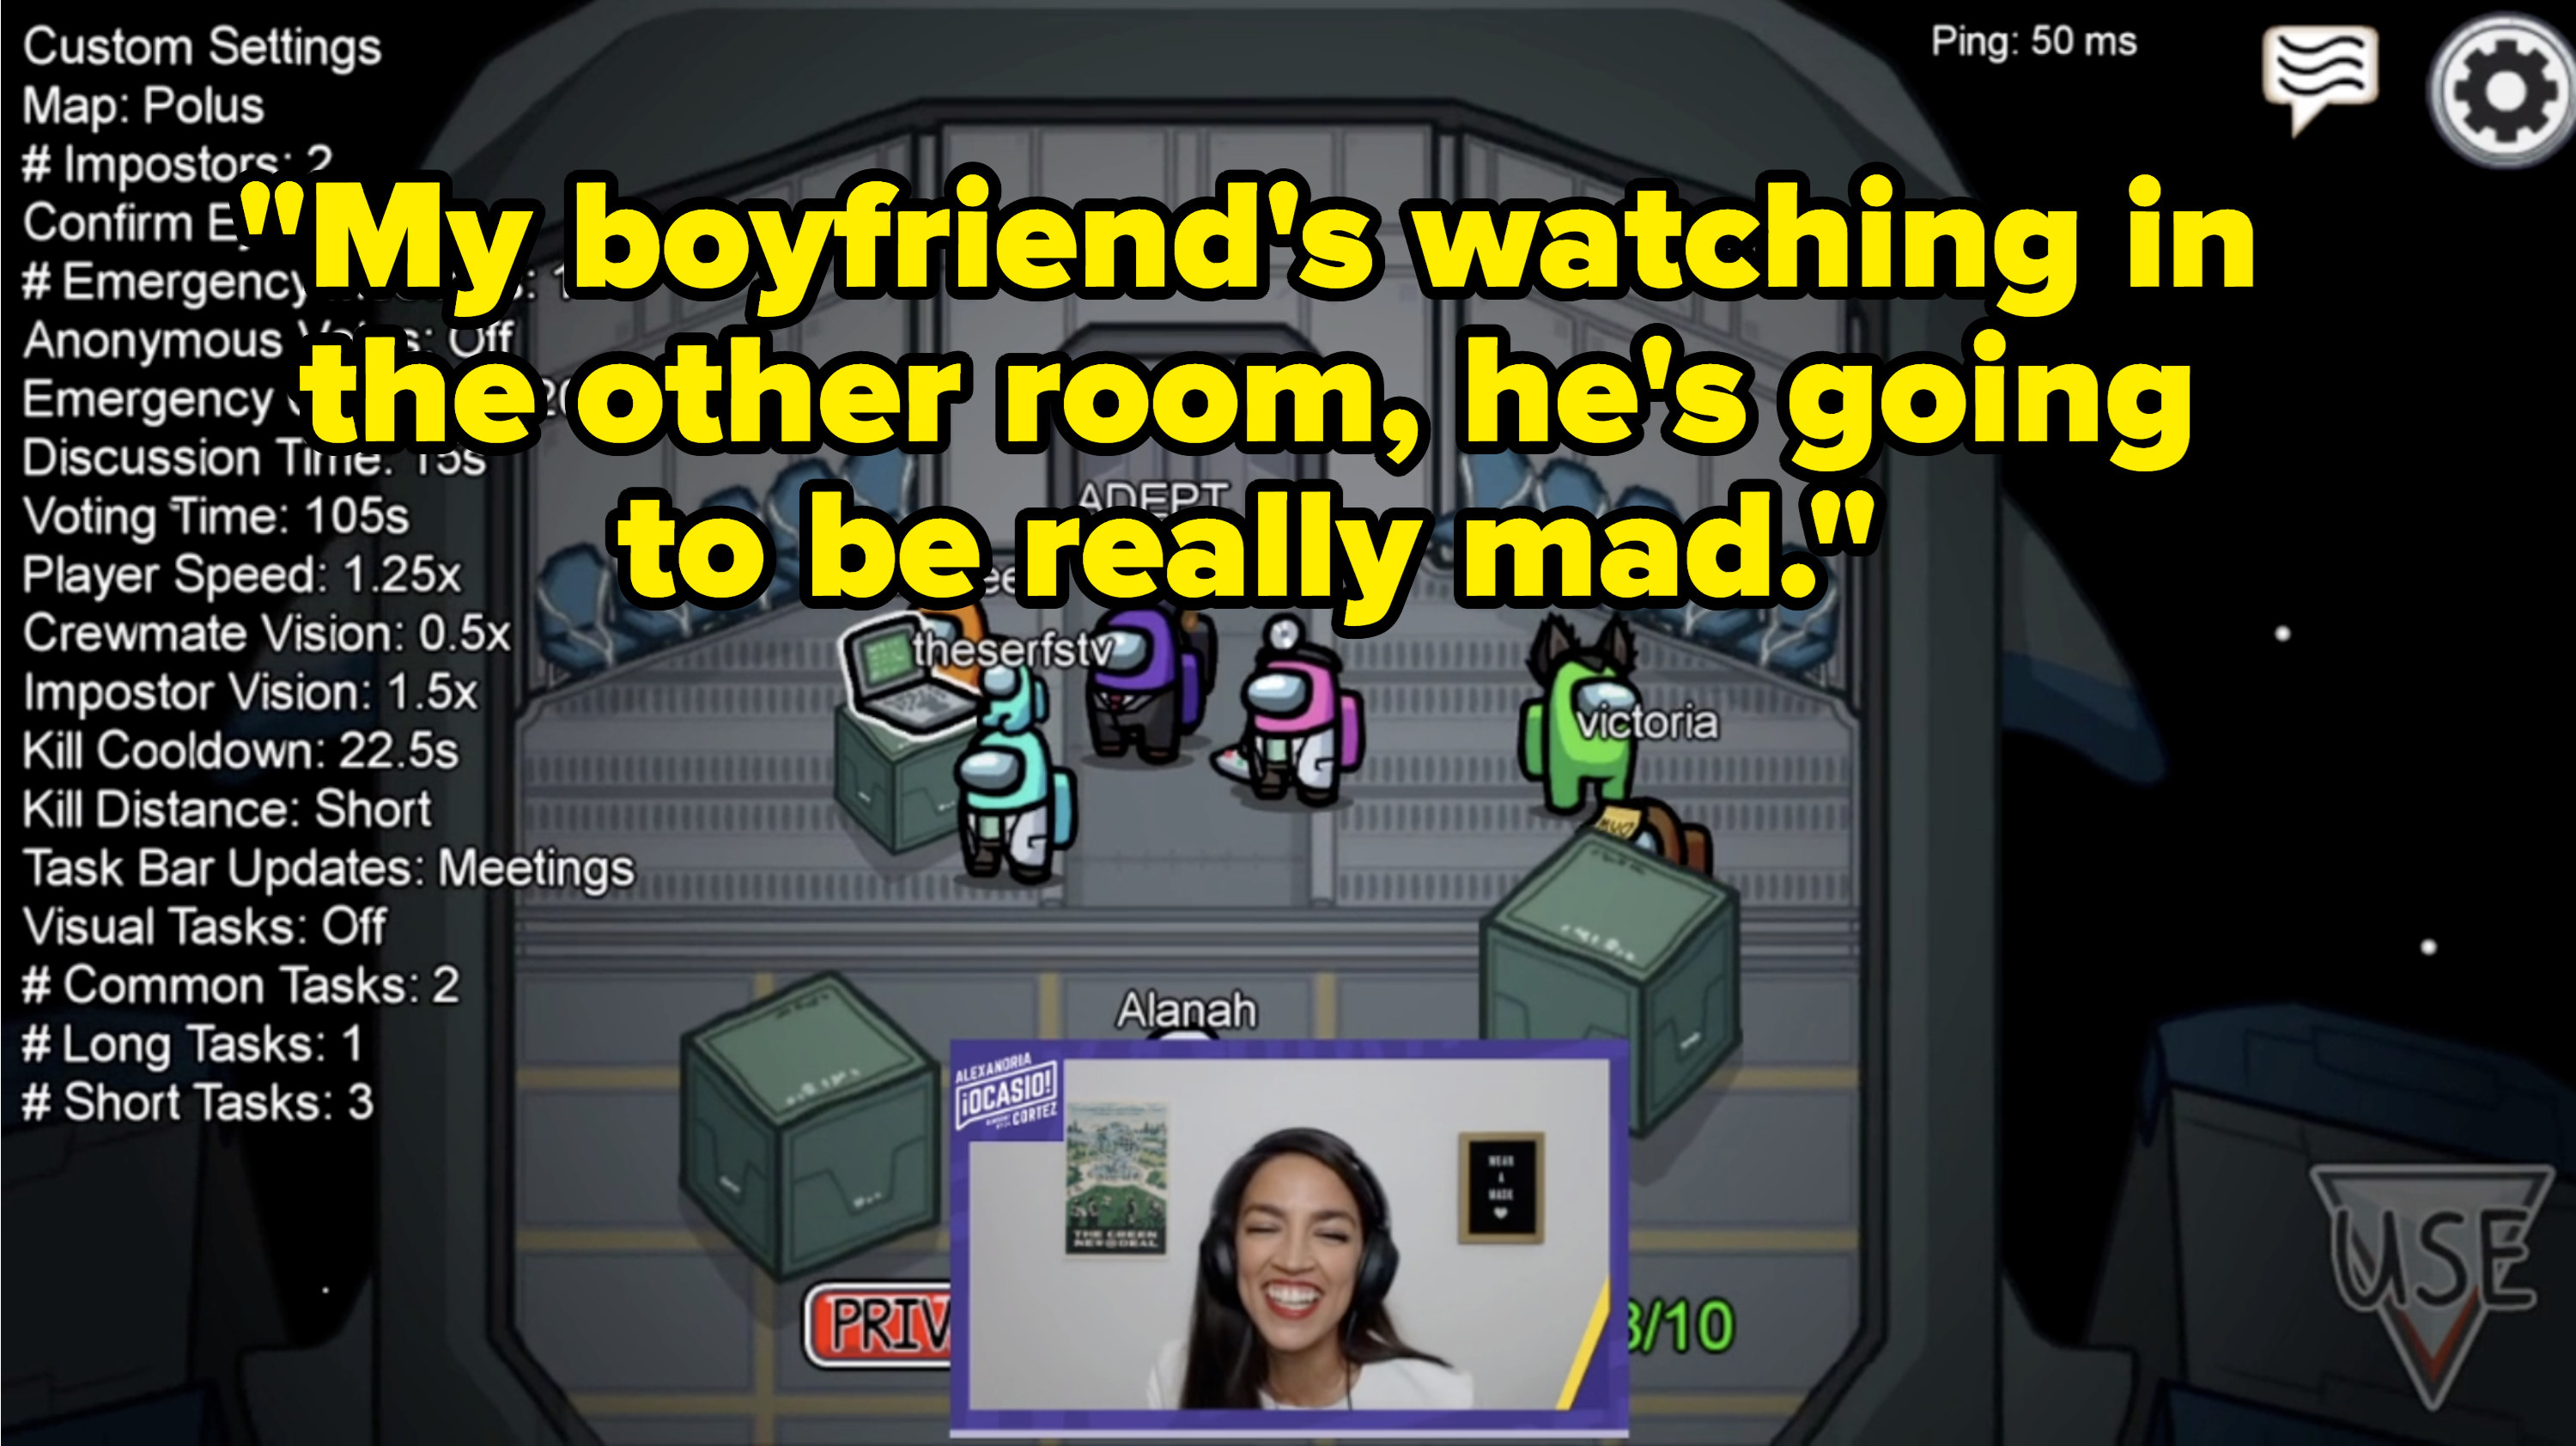 AOC says her boyfriend is watching in the other room